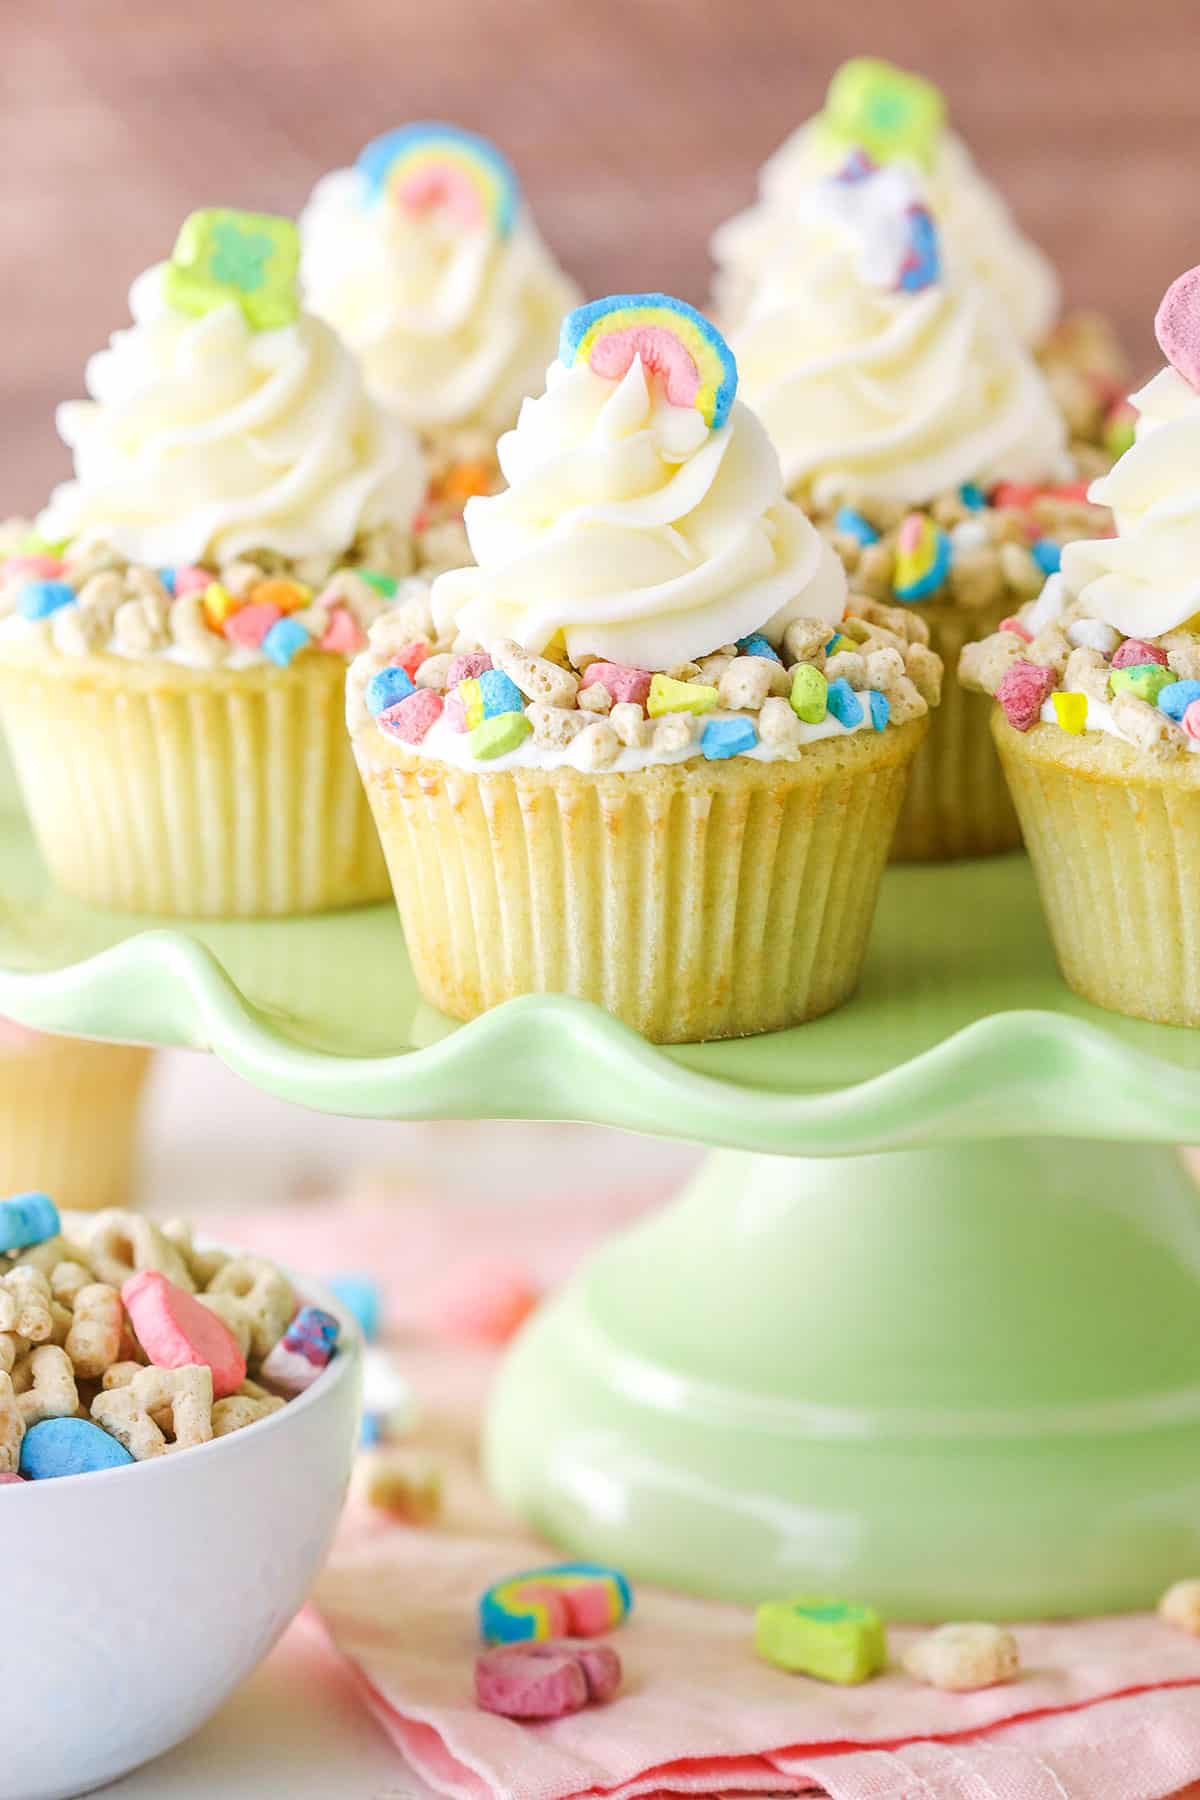 Festive Cereal Cupcakes